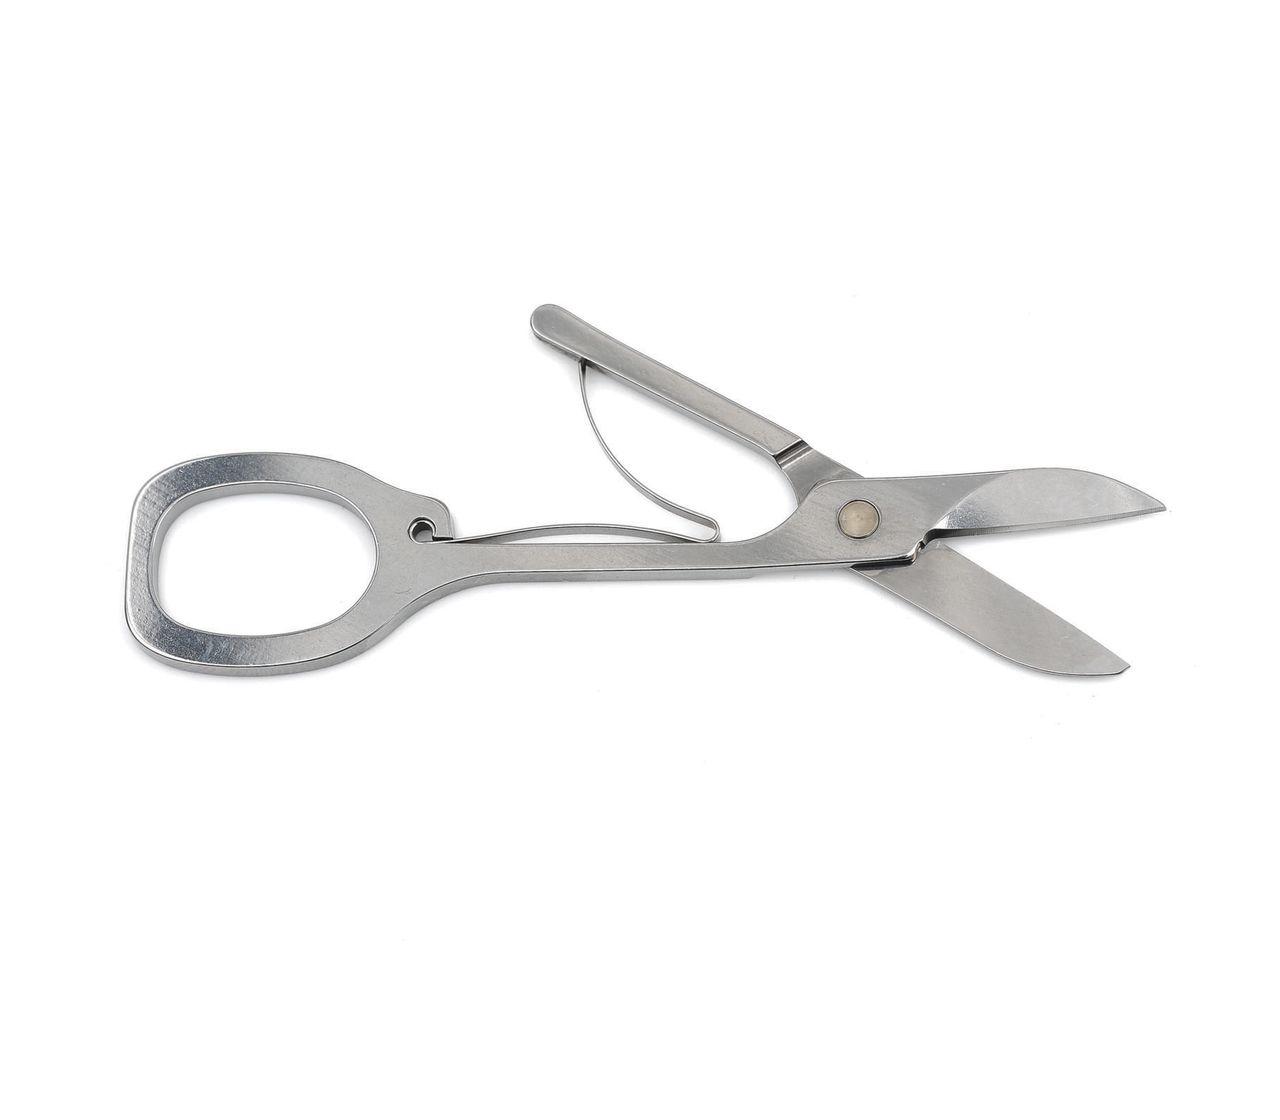 Replacement Scissors for Swiss Card-A.6427